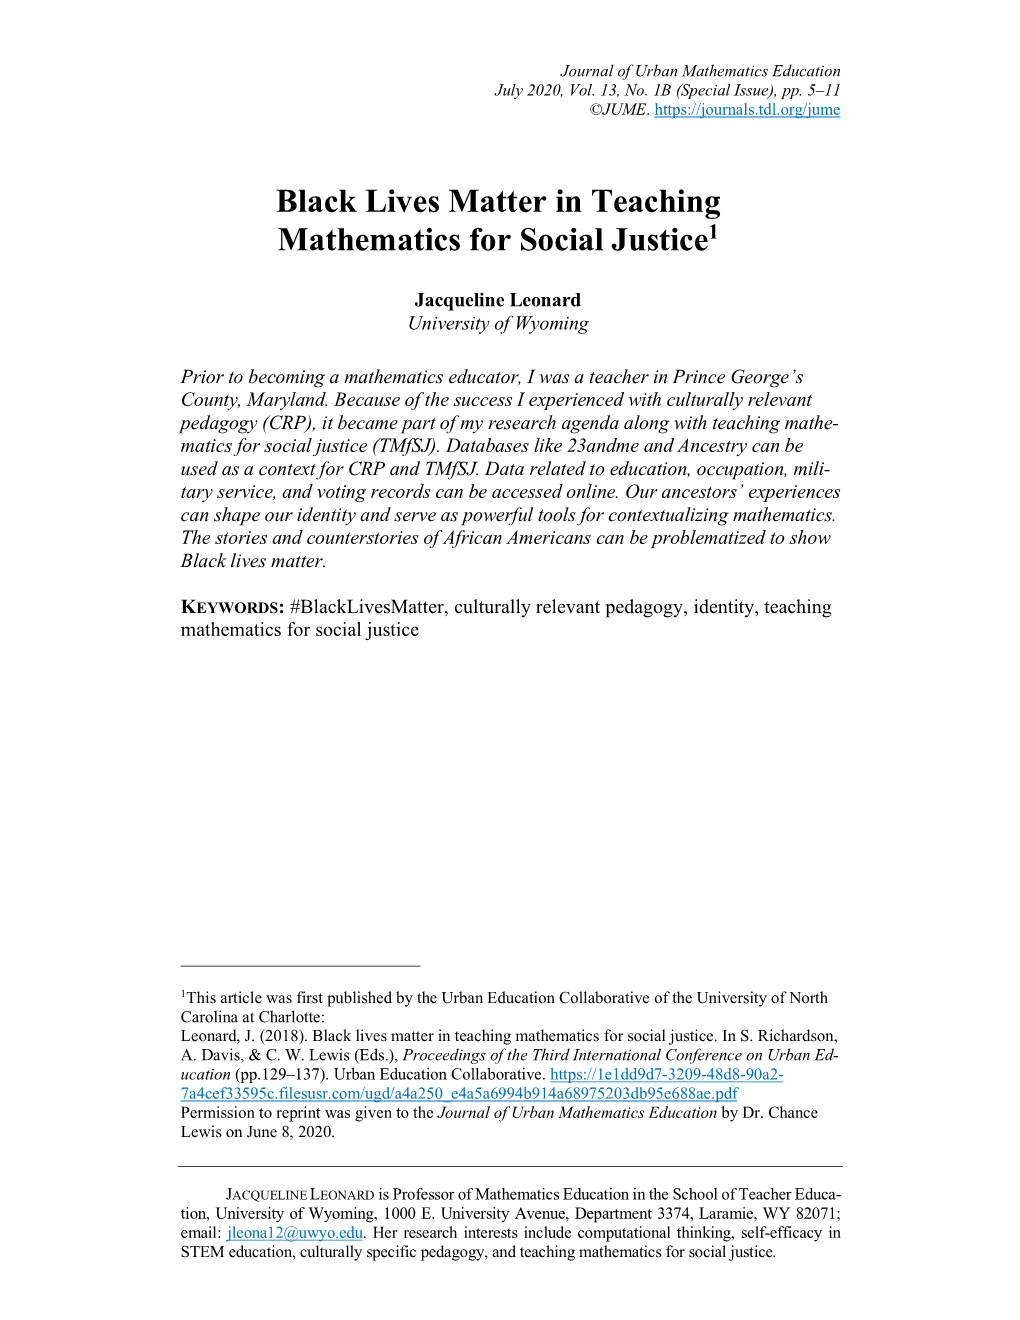 Black Lives Matter in Teaching Mathematics for Social Justice1